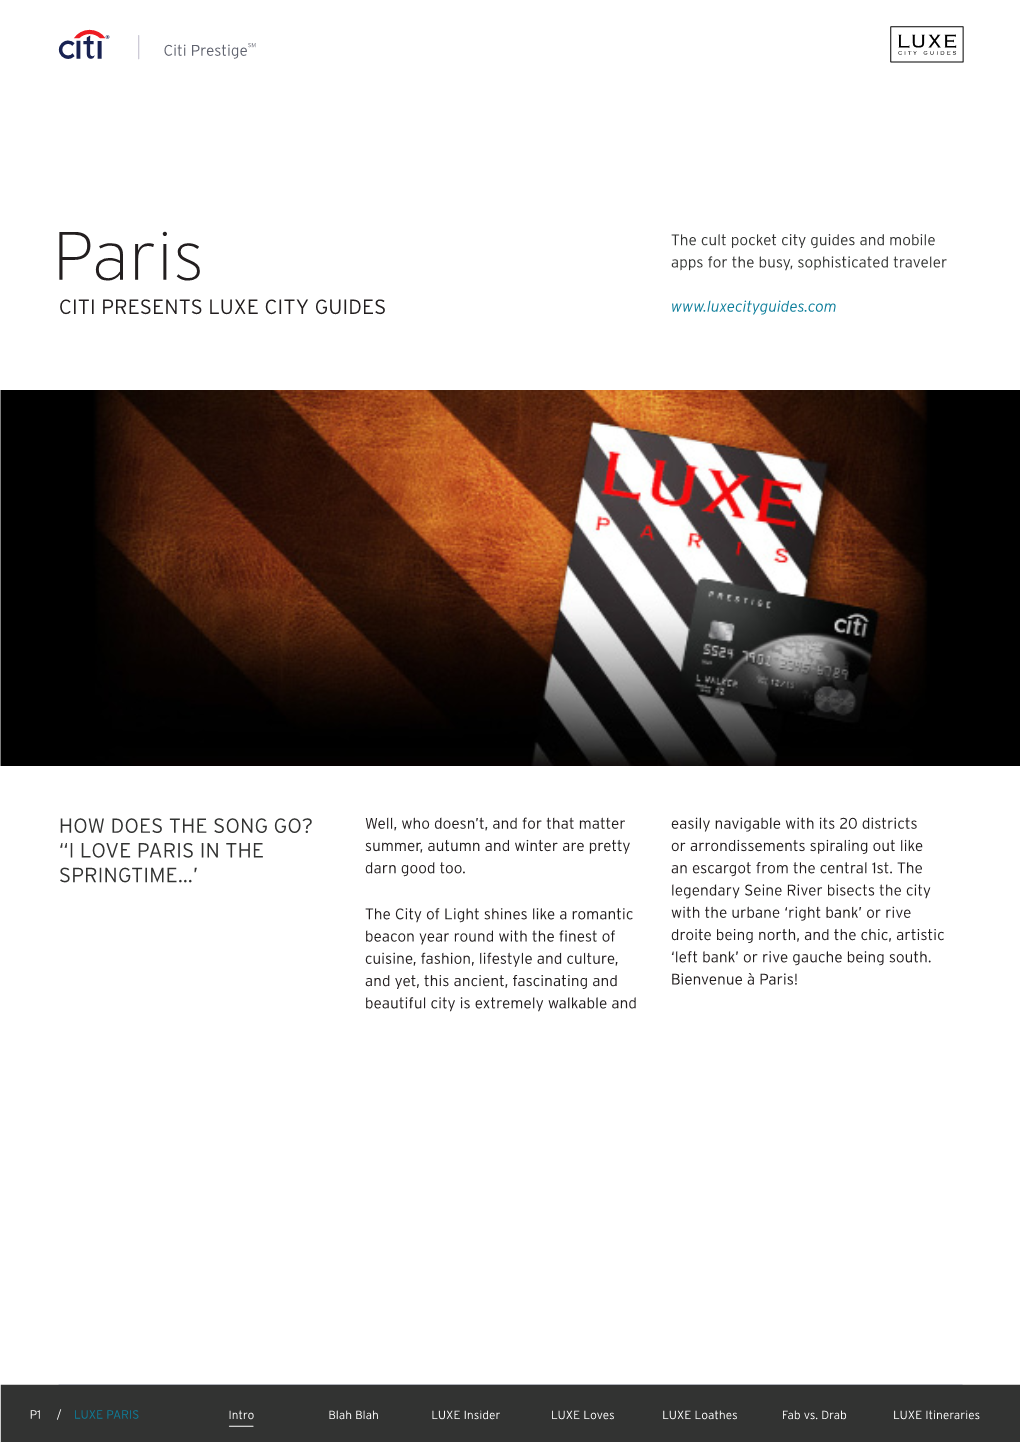 How Does the Song Go? “I Love Paris in the Springtime…' Citi Presents Luxe City Guides